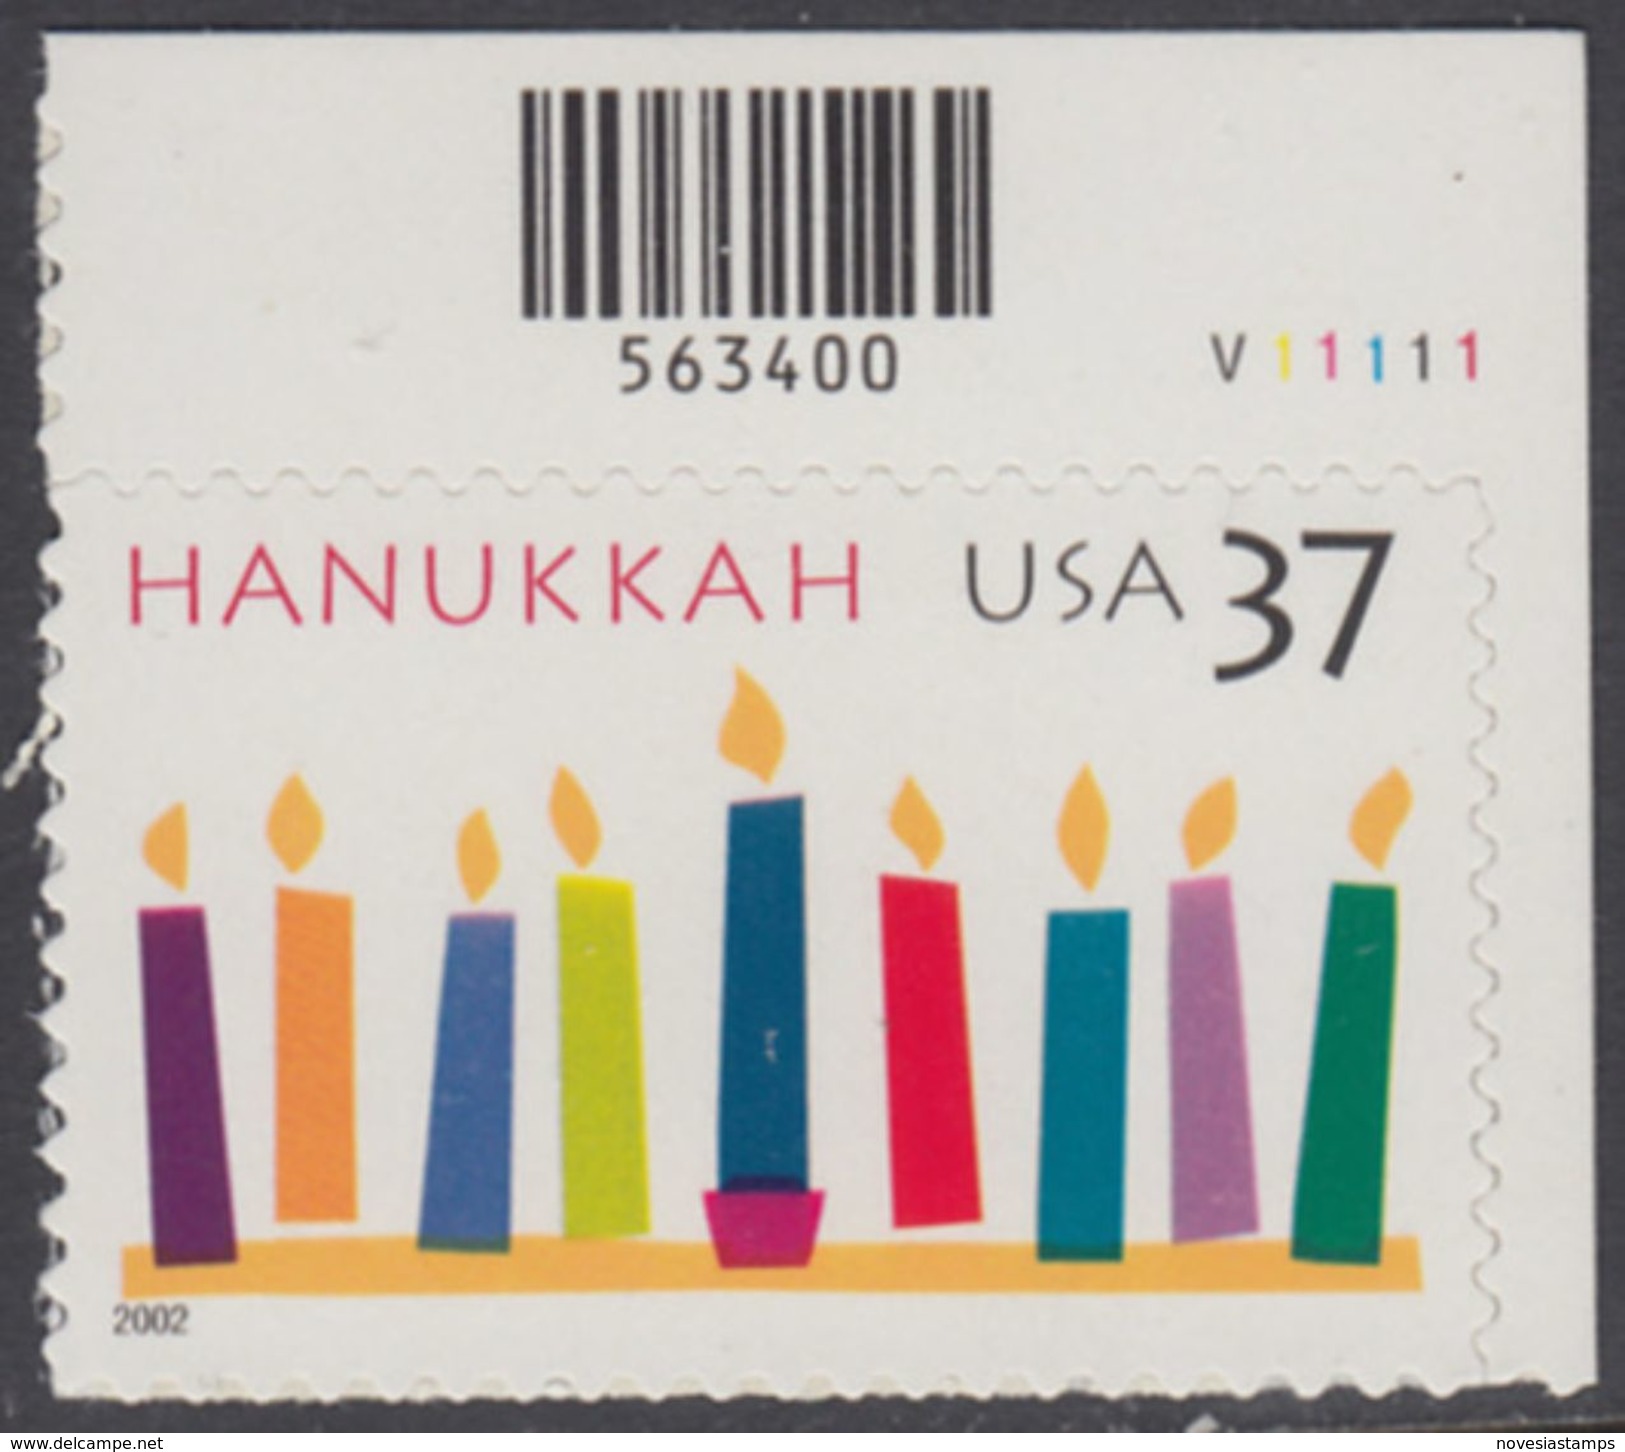 !a! USA Sc# 3672 MNH SINGLE From Upper Right Corner W/ Plate-# (UR/V11111) - Hanukkah - Unused Stamps